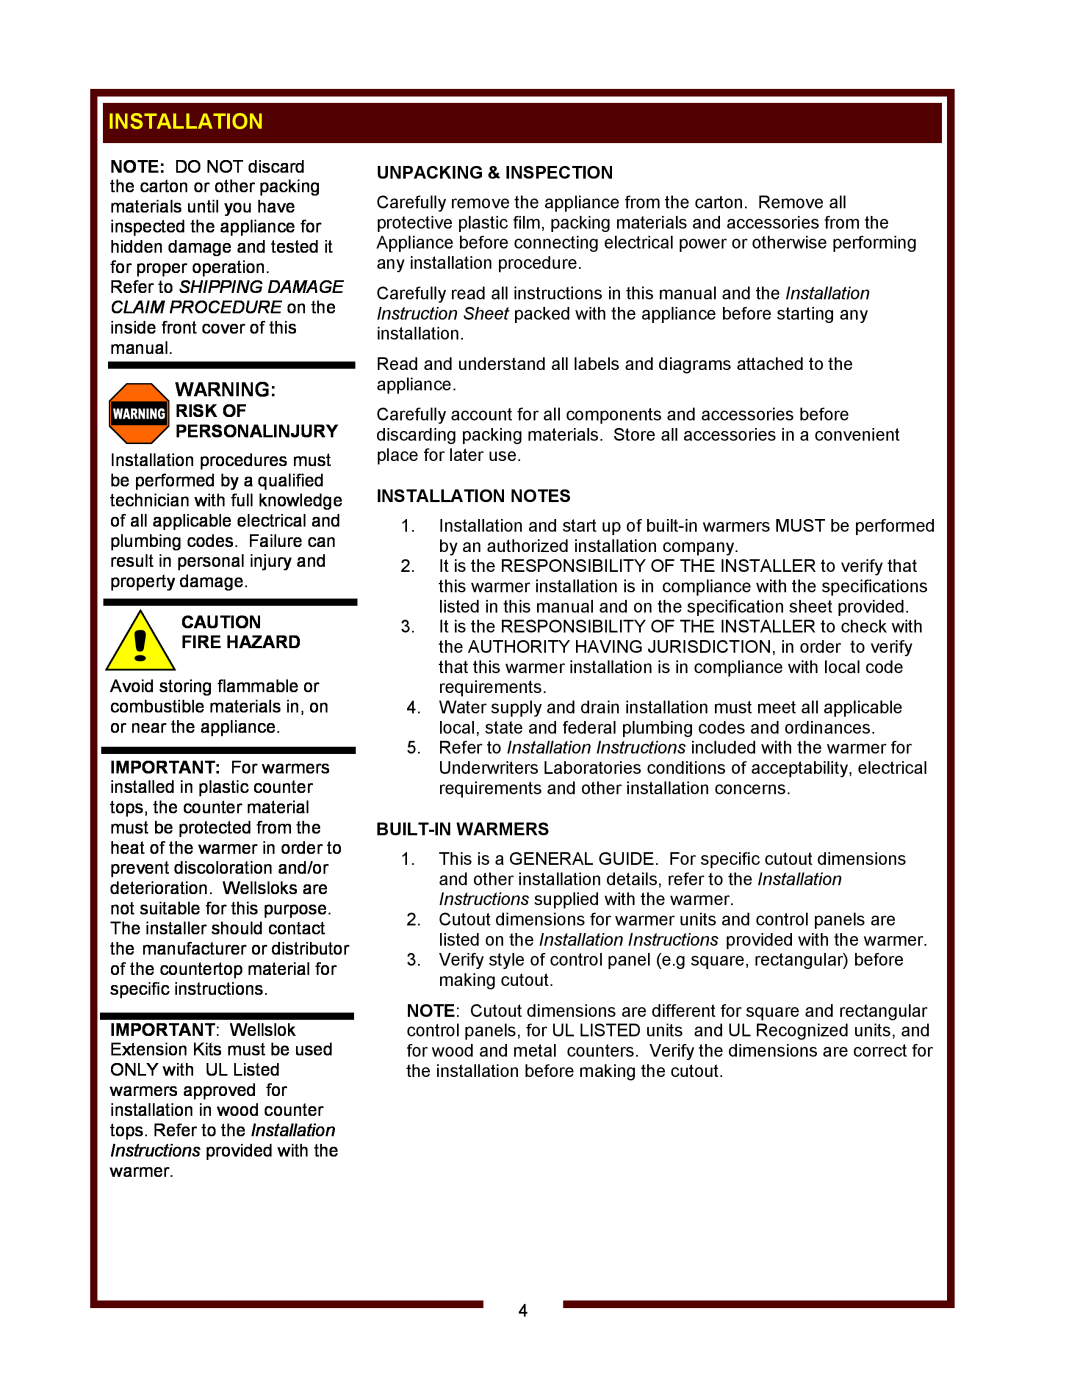 Wells HW-106D Risk Of Personalinjury, Fire Hazard, Unpacking & Inspection, Installation Notes, Built-In Warmers 